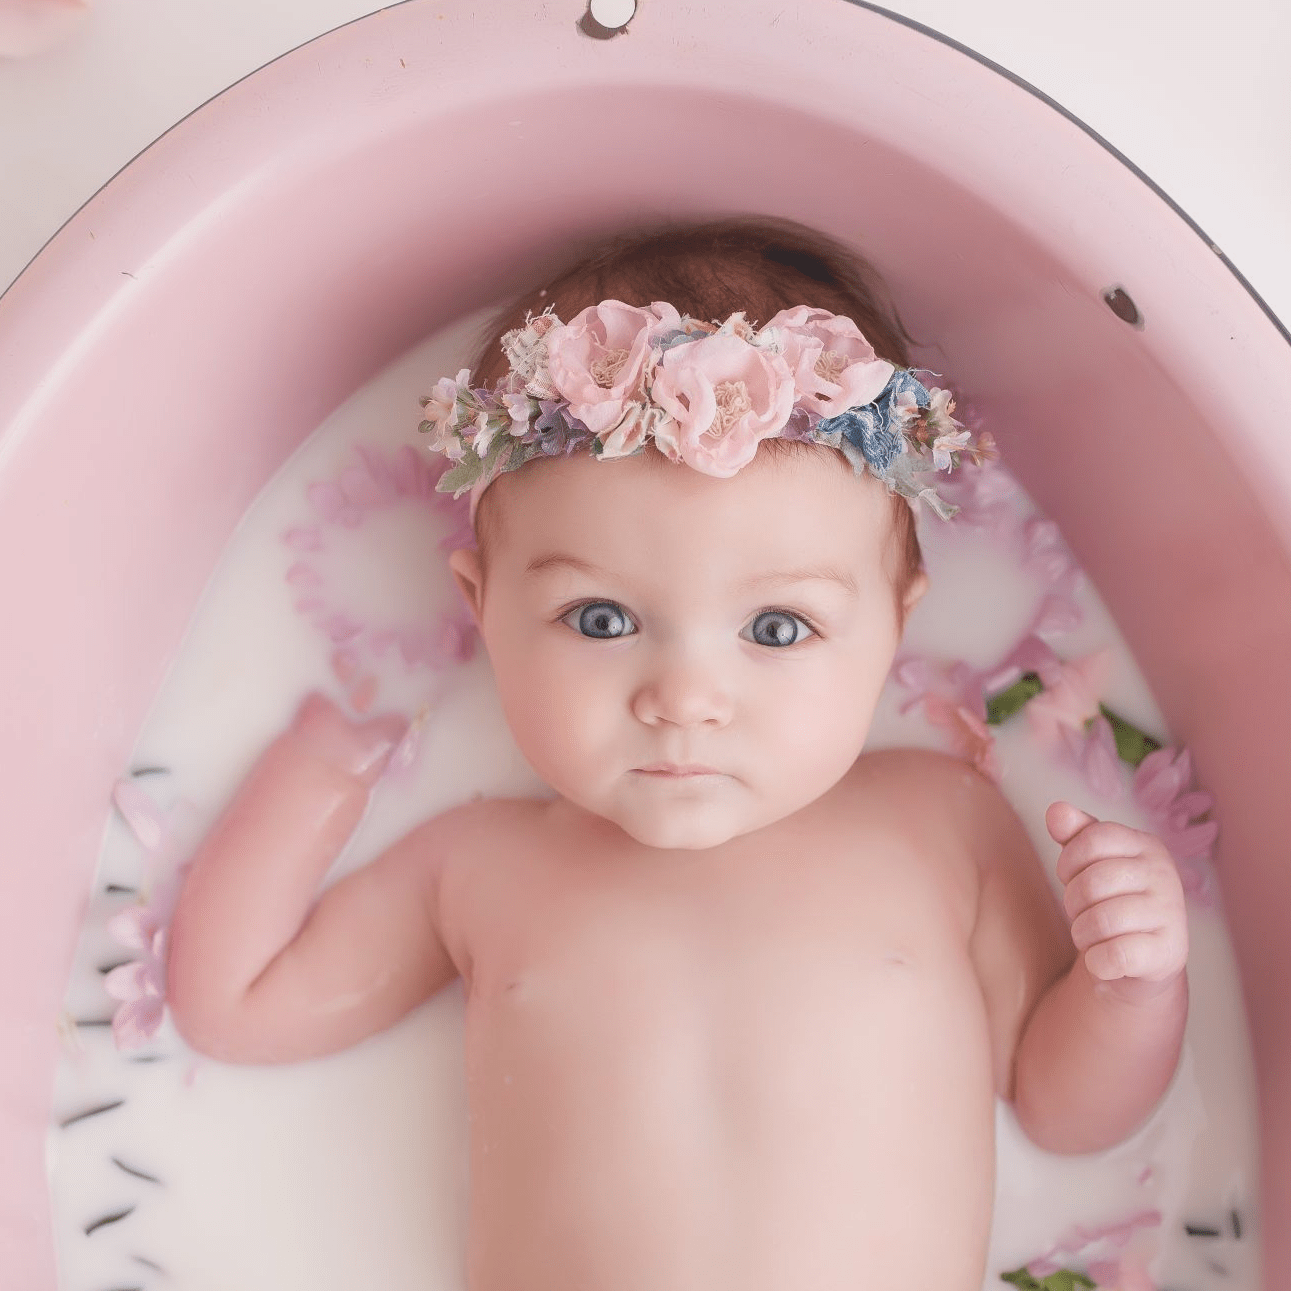 Bath Stuff For Baby Eczema : Bathing Babies With Eczema A Comprehensive Guide Westyn Baby : For a baby or toddler bathtub, add one teaspoon of bleach per gallon of water.